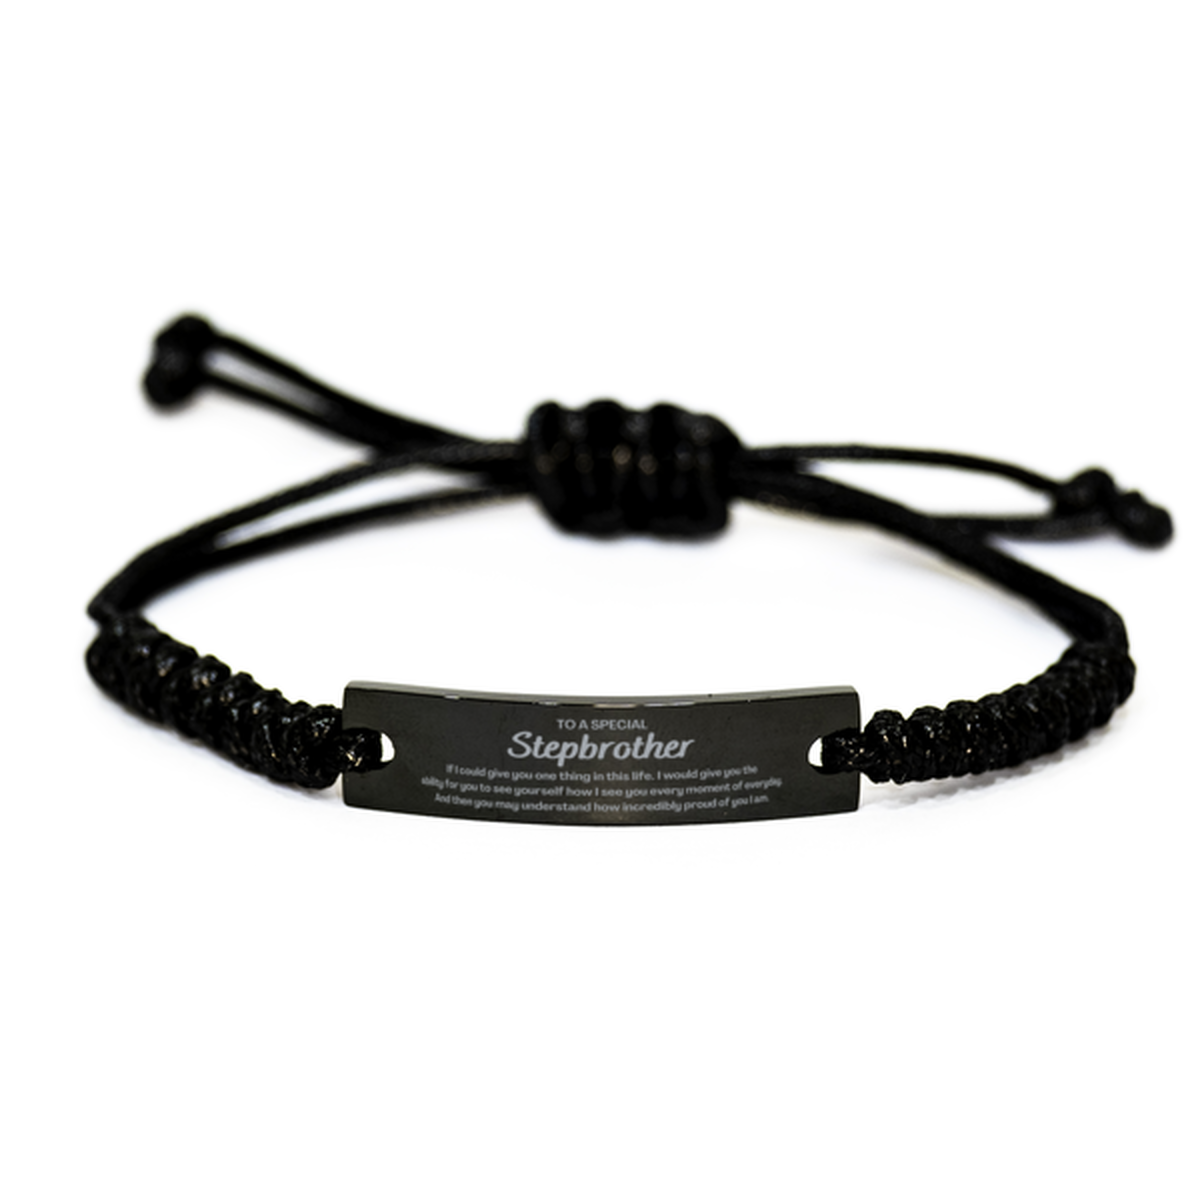 To My Stepbrother Black Rope Bracelet, Gifts For Stepbrother Engraved, Inspirational Gifts for Christmas Birthday, Epic Gifts for Stepbrother To A Special Stepbrother how incredibly proud of you I am